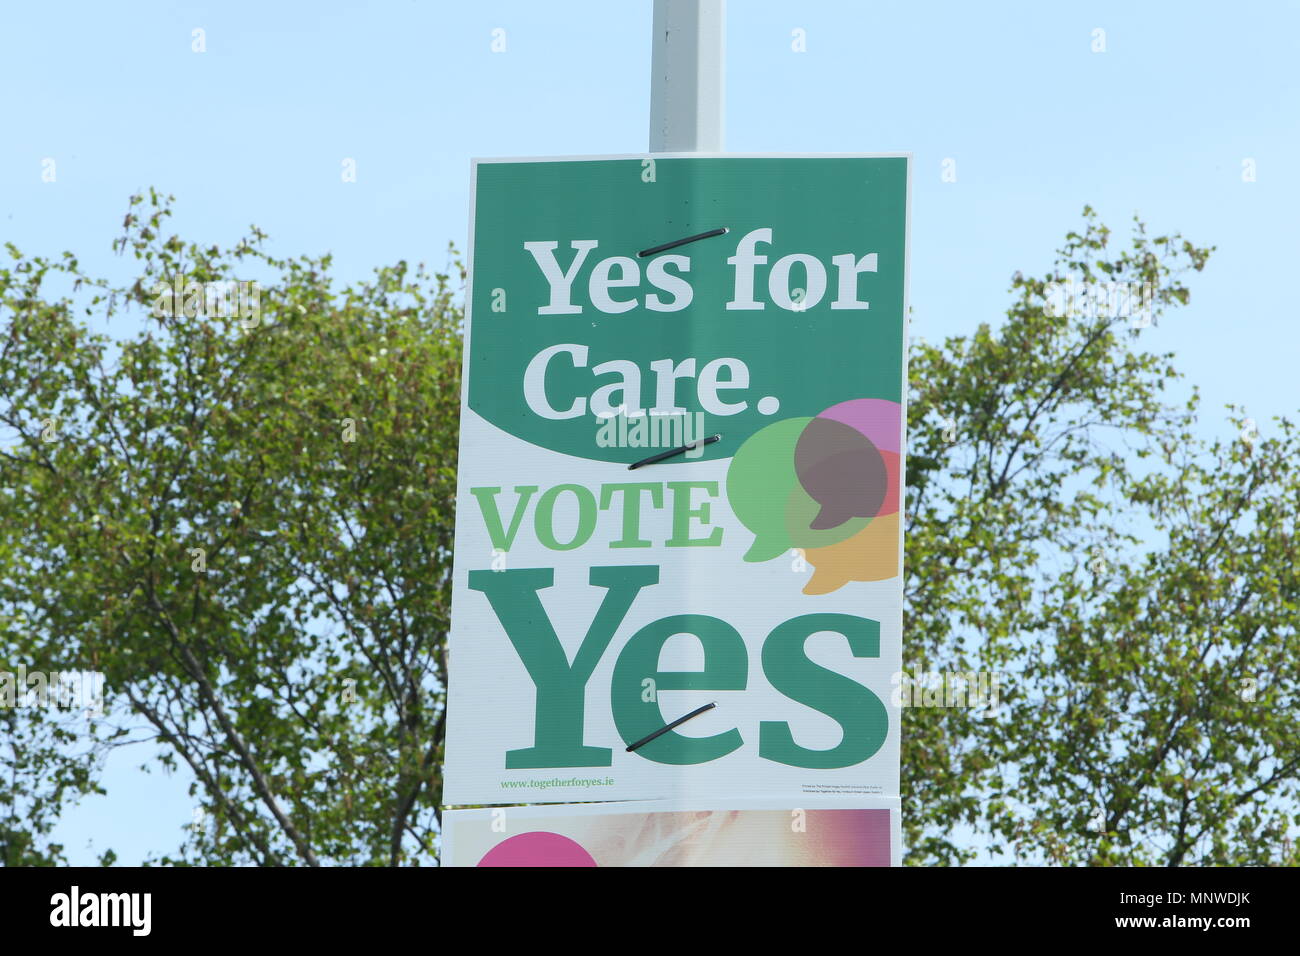 Image of a campaign poster for the Yes side in the Irish 8th Amendment Referendum. The Yes side campaigns to remove the 8th Amendment to the Irish Constitution which stipulates rights for the unborn as part of a move to liberalise the Republic of Ireland's abortion laws. Stock Photo